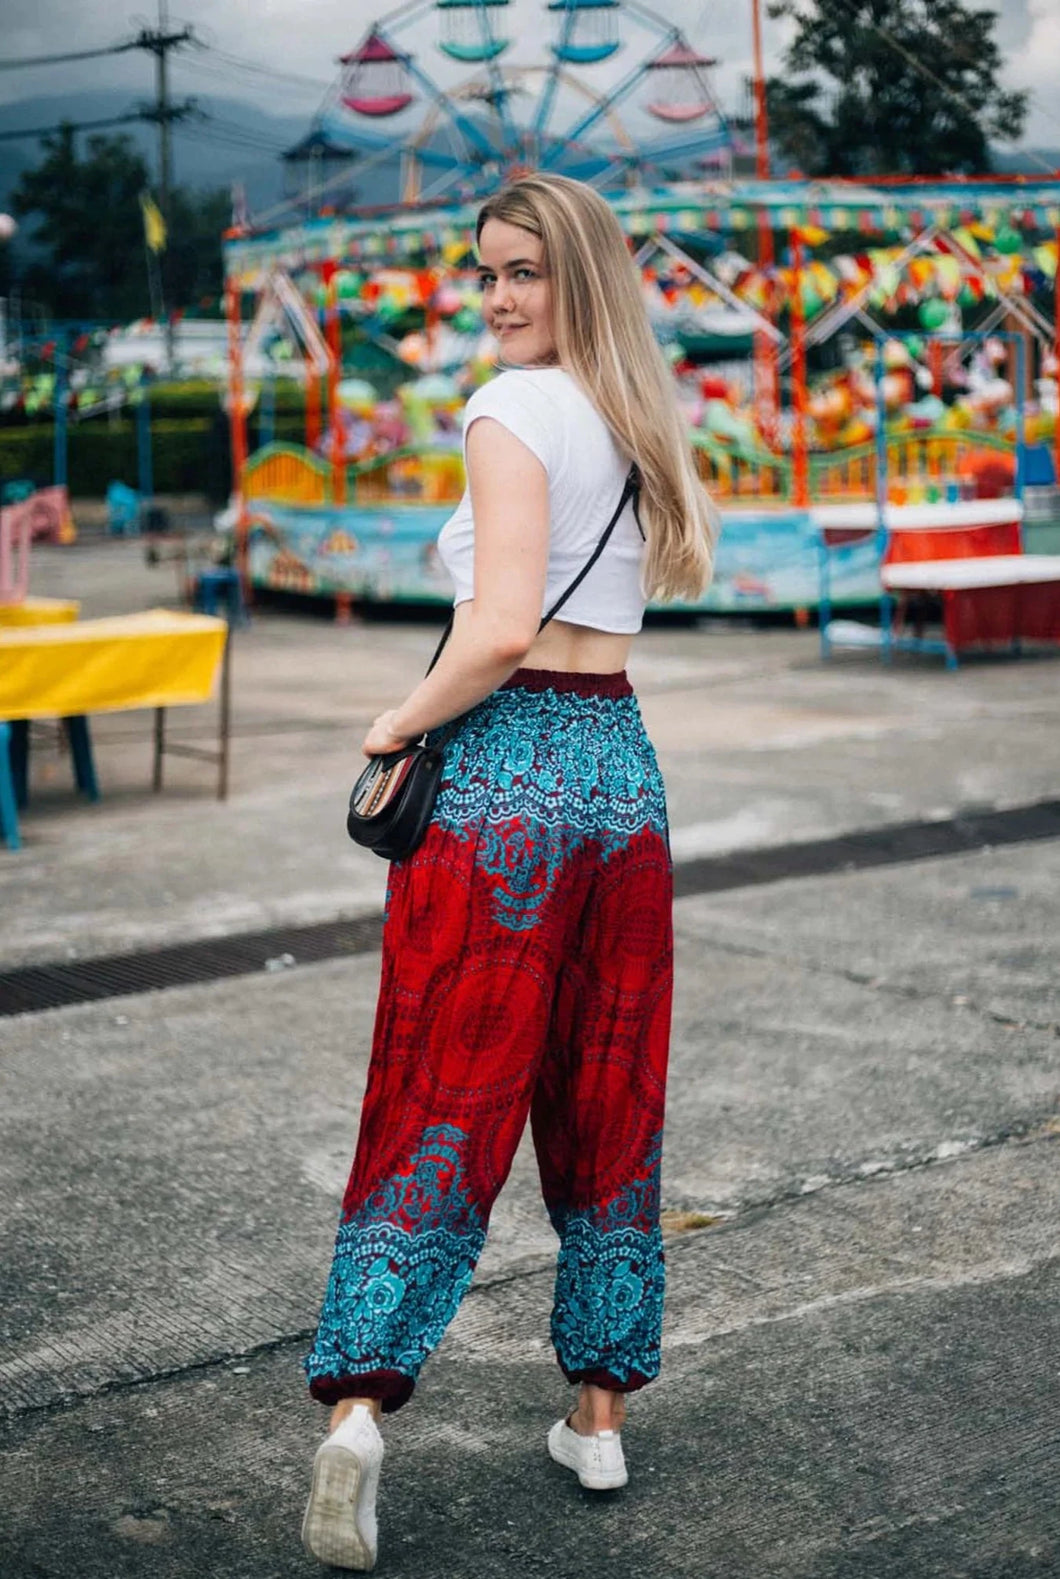 Blue/Red Harem Bohemian Style Pants with Pocket. Very stretchy waistband. Perfect for te beach or lounge wear. Available in British Columbia